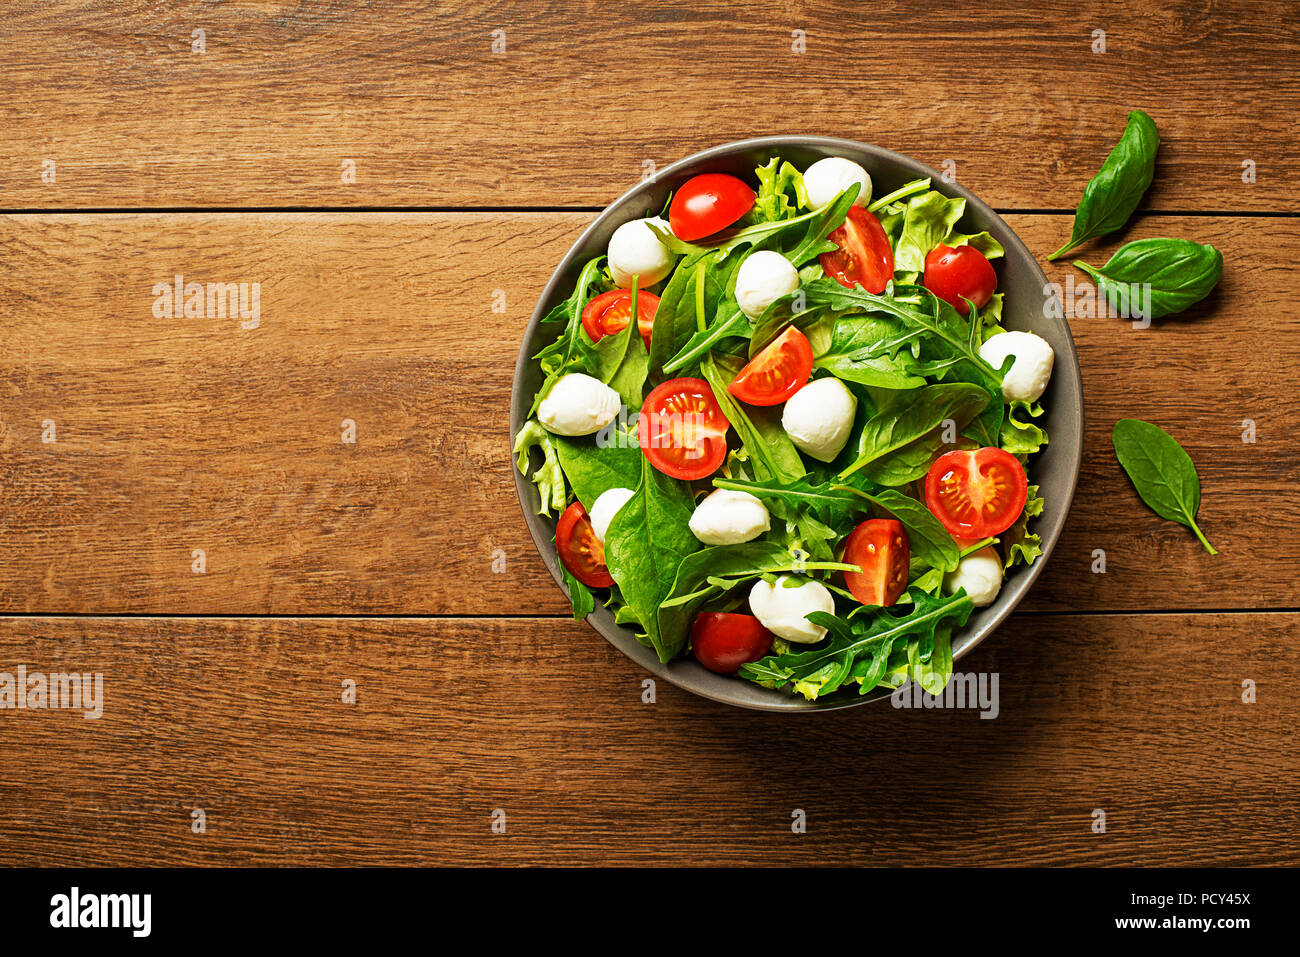 Green lettuce Salad with mozzarella cheese arugula and tomato on wooden background Stock Photo